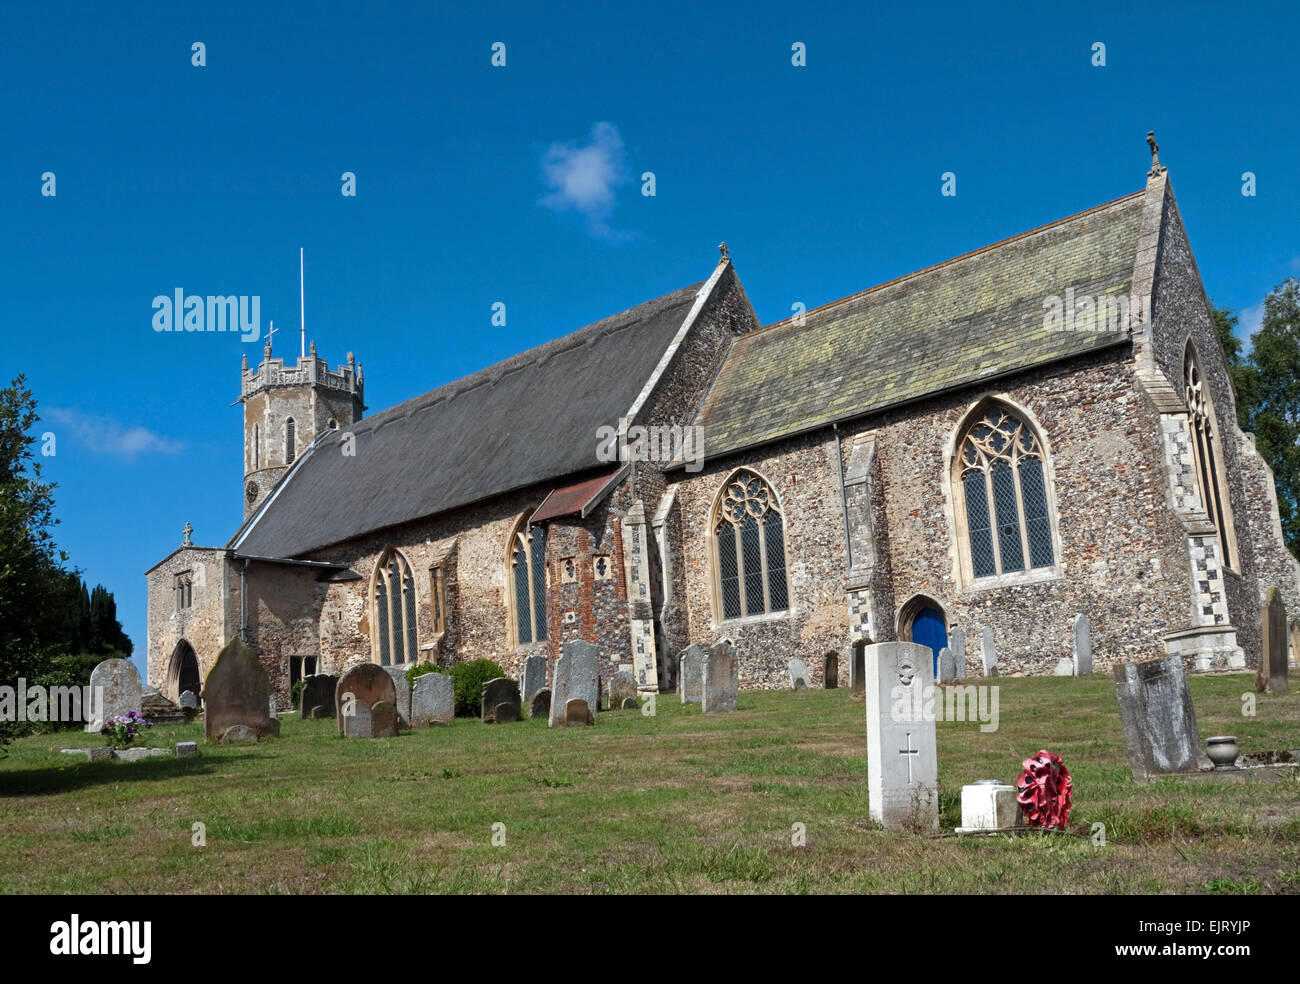 The part-thatched round-towered Church of St Edmund King and Martyr, in the small market town of Acle, Norfolk, England Stock Photo